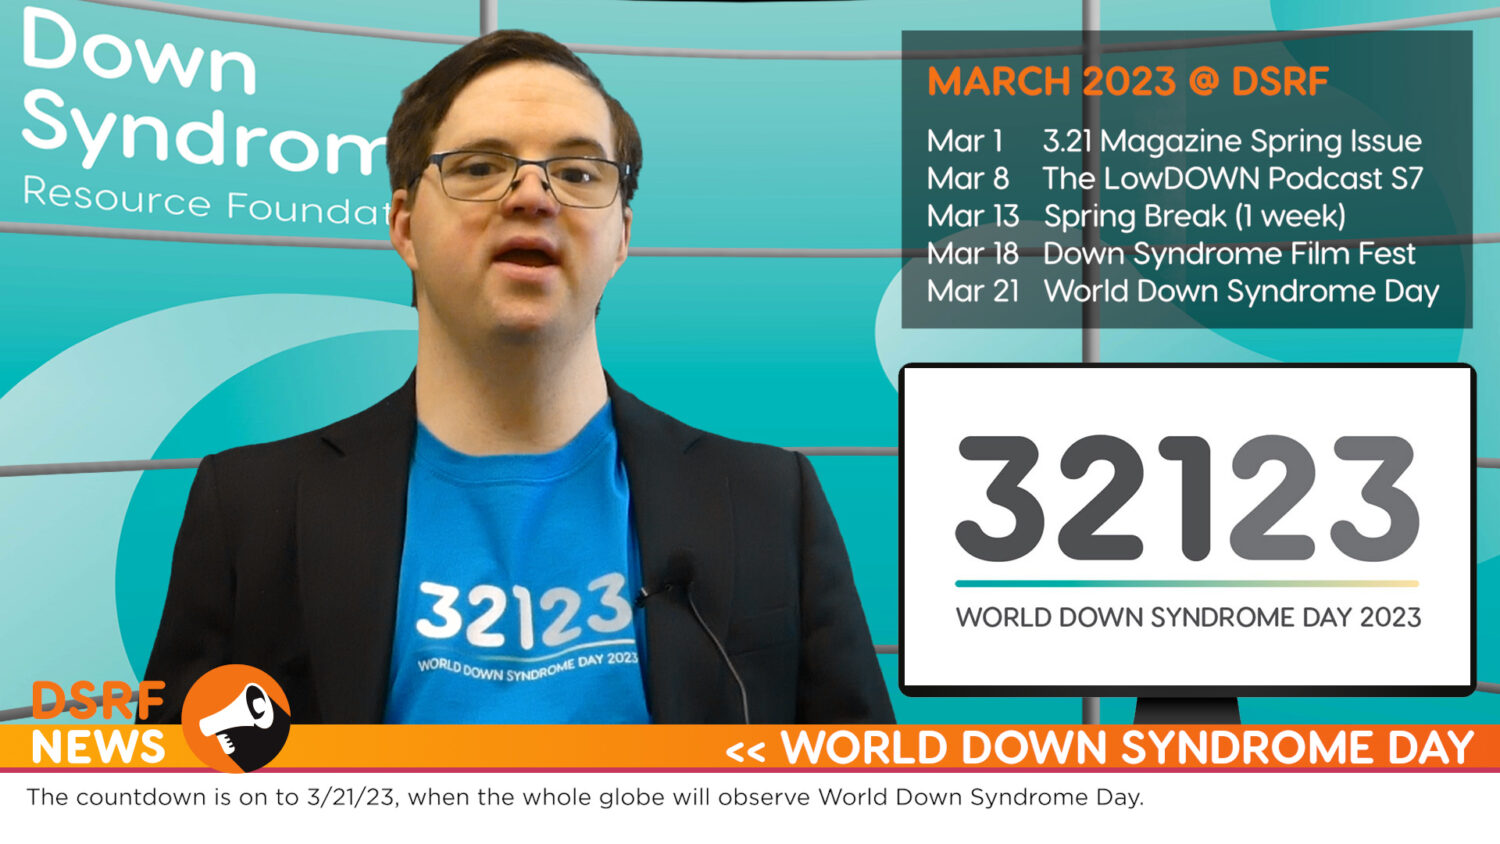 white man with Down syndrome, brown hair and glasses, wearing turquoise t-shirt and black sport coat, delivers news from virtual news studio